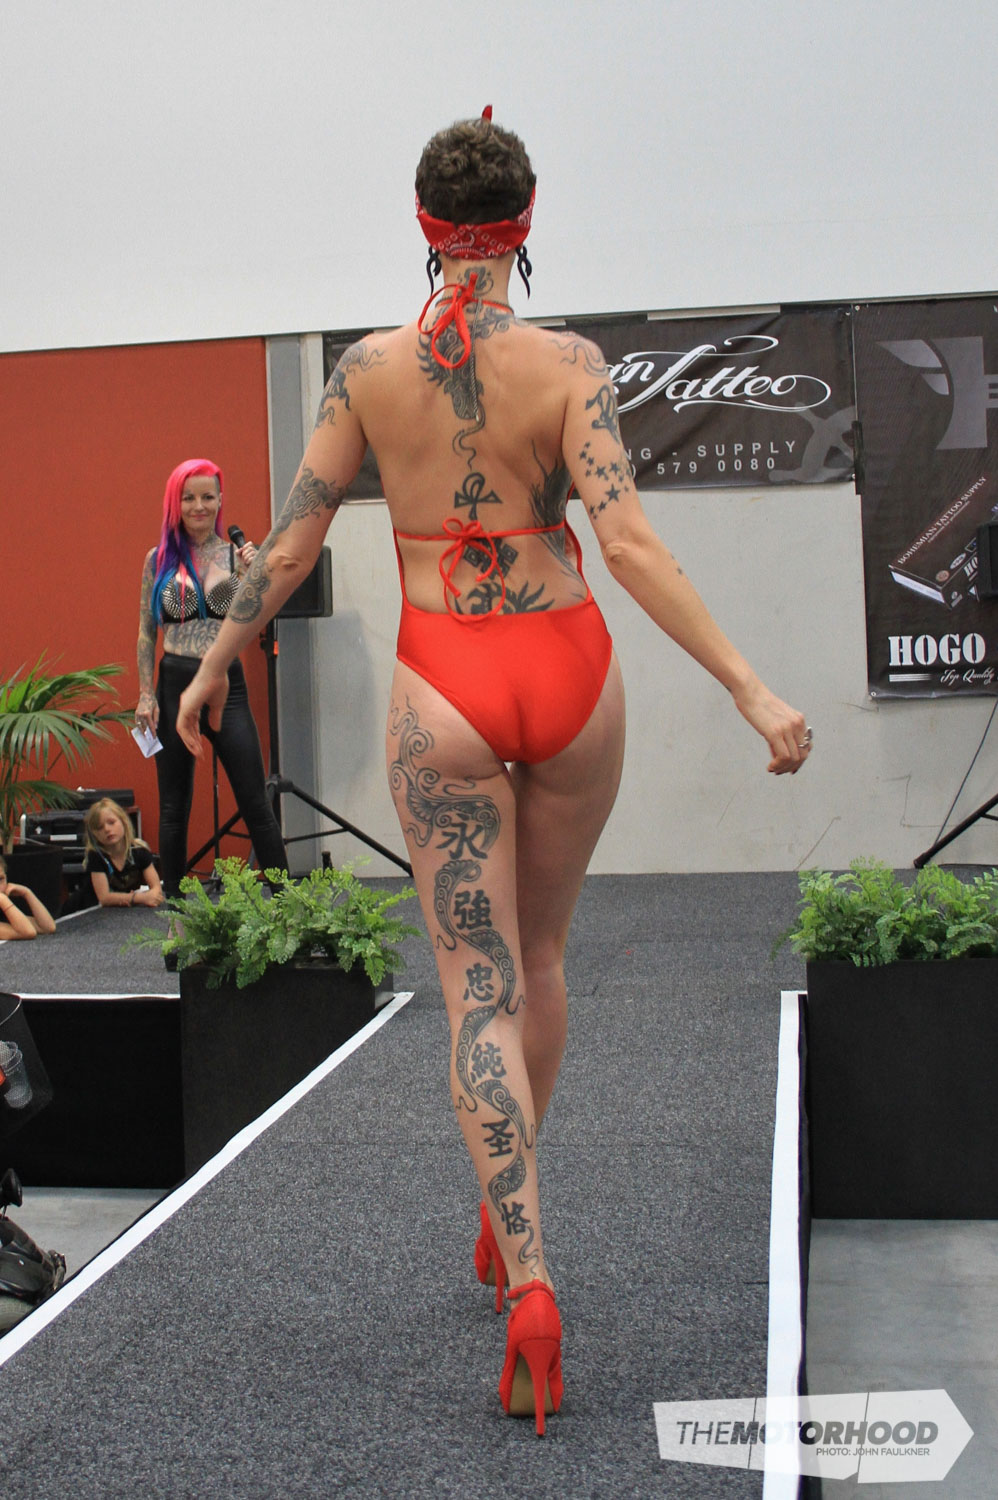 Emilie from San Francisco was awarded second place in Miss Tattoo 2015